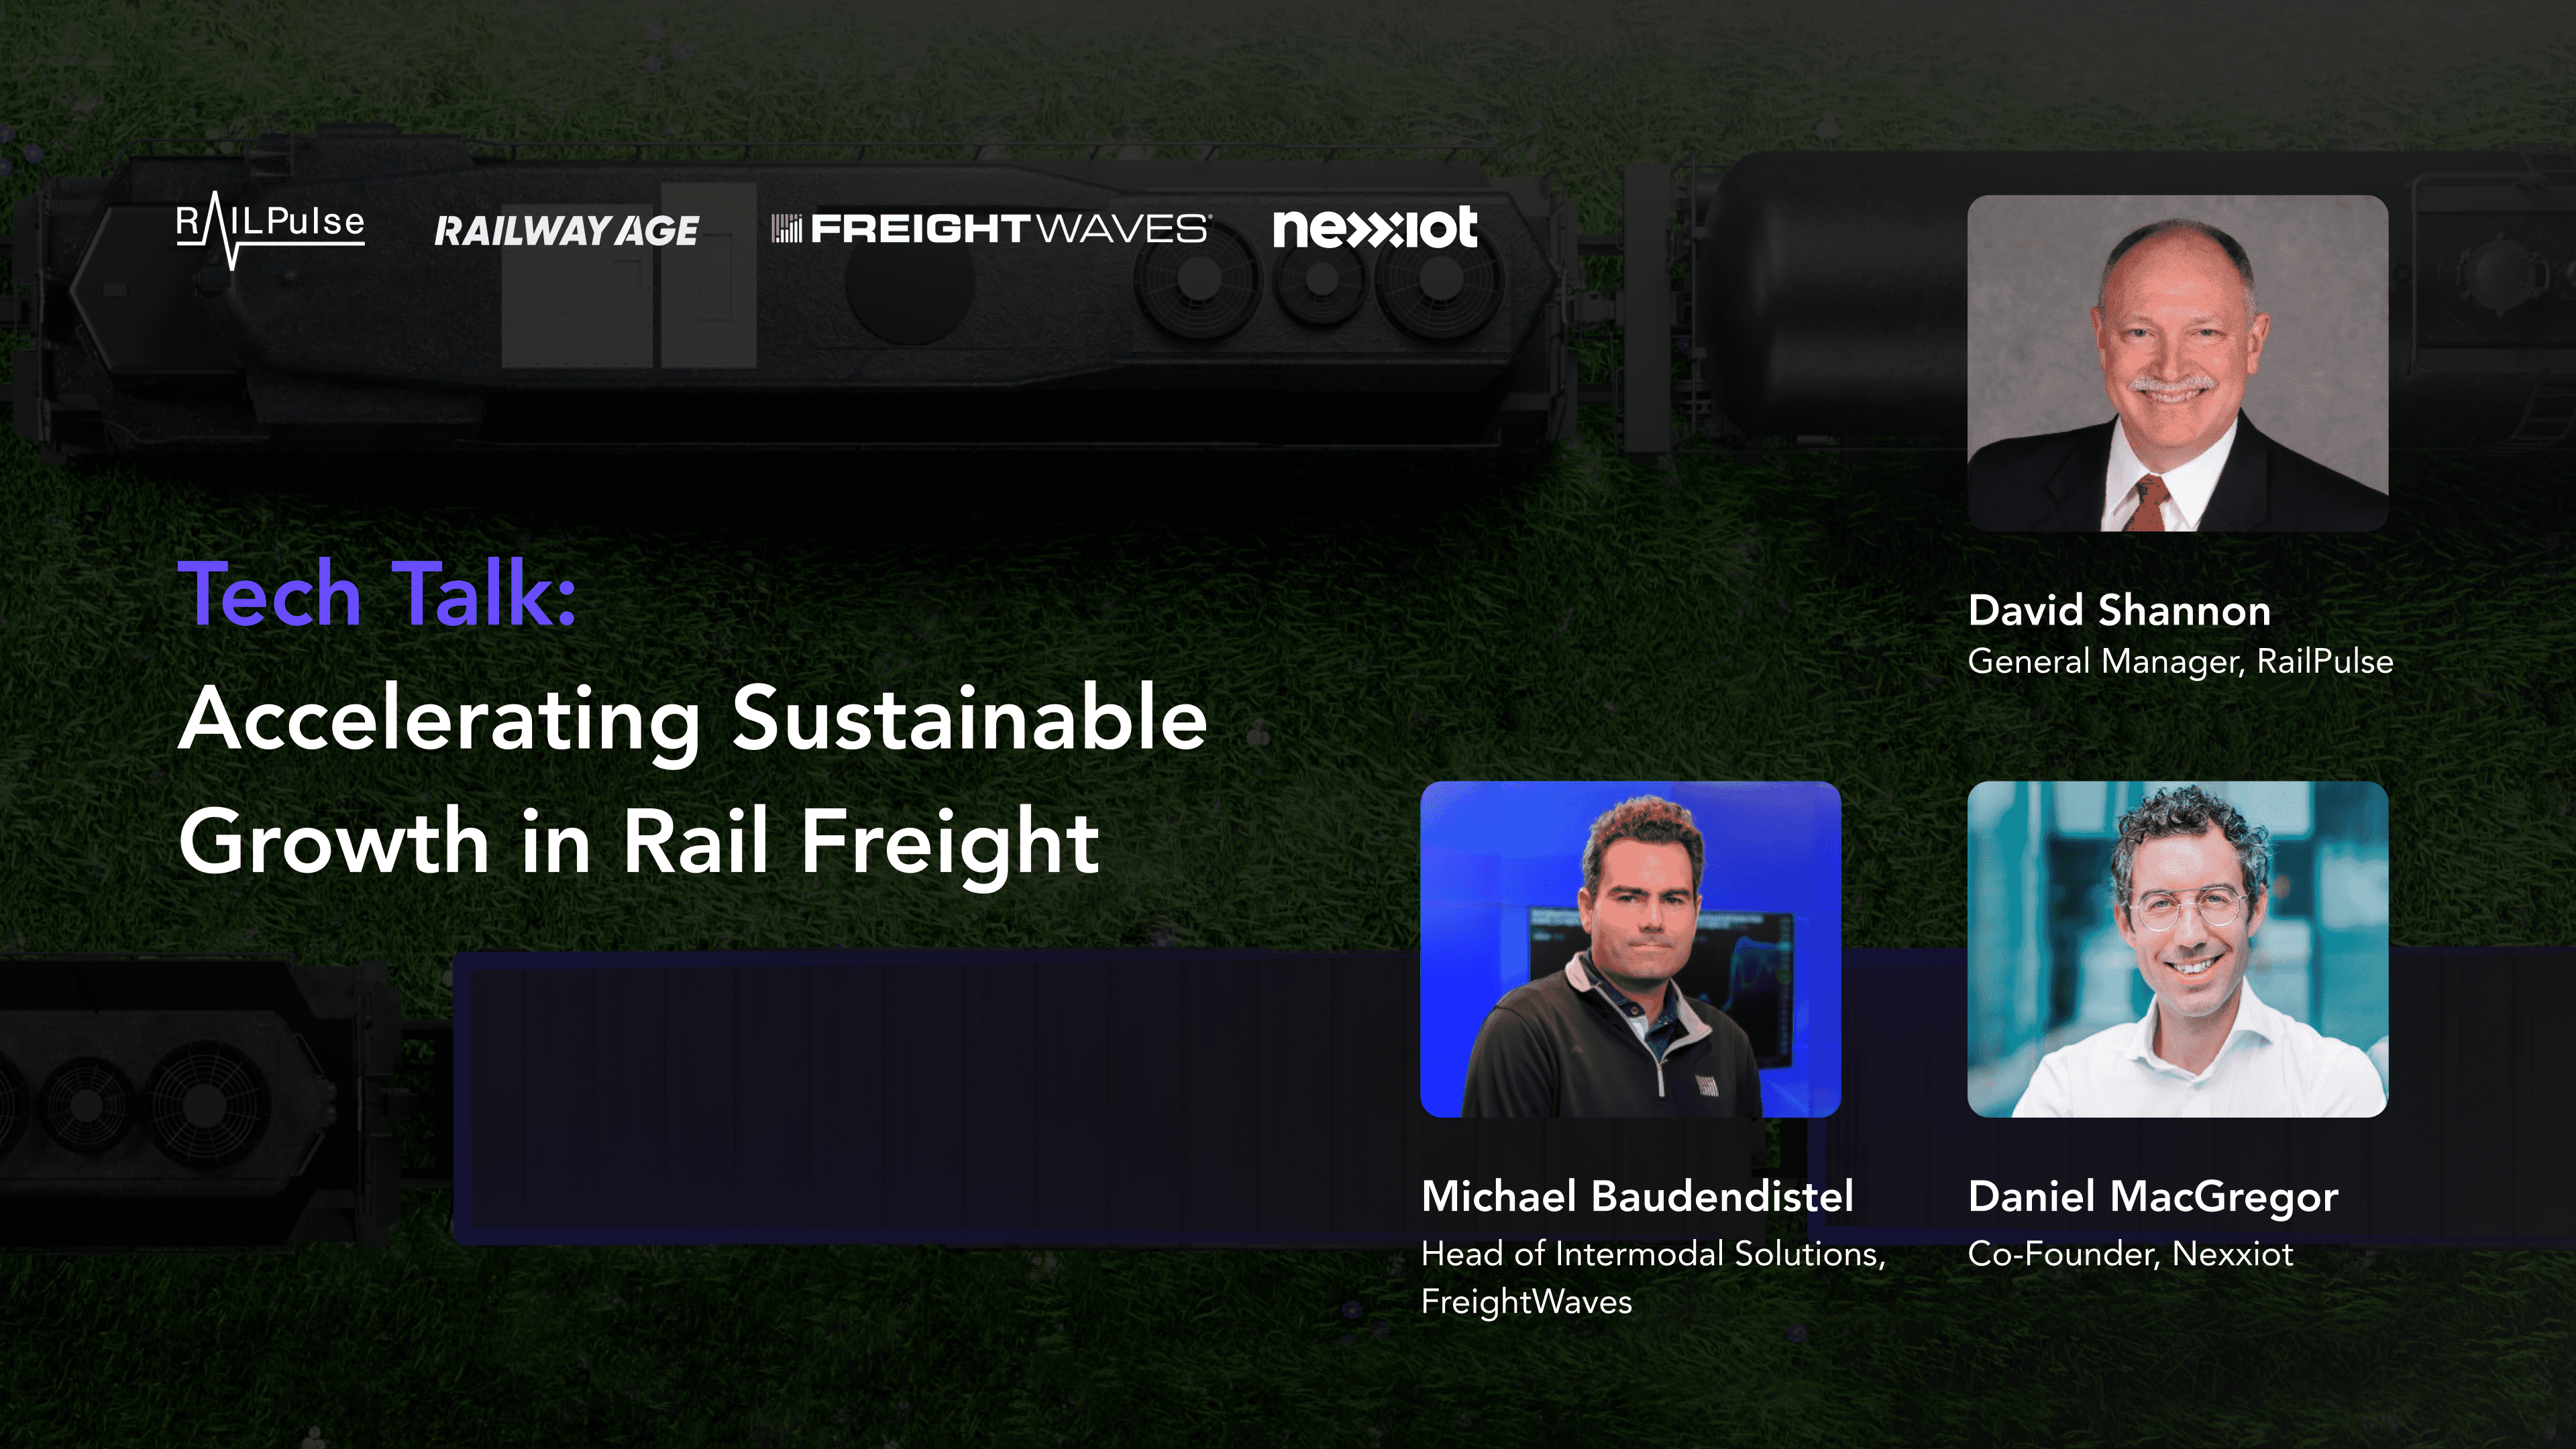 Tech Talk: Accelerating Sustainable Growth in Rail Freight